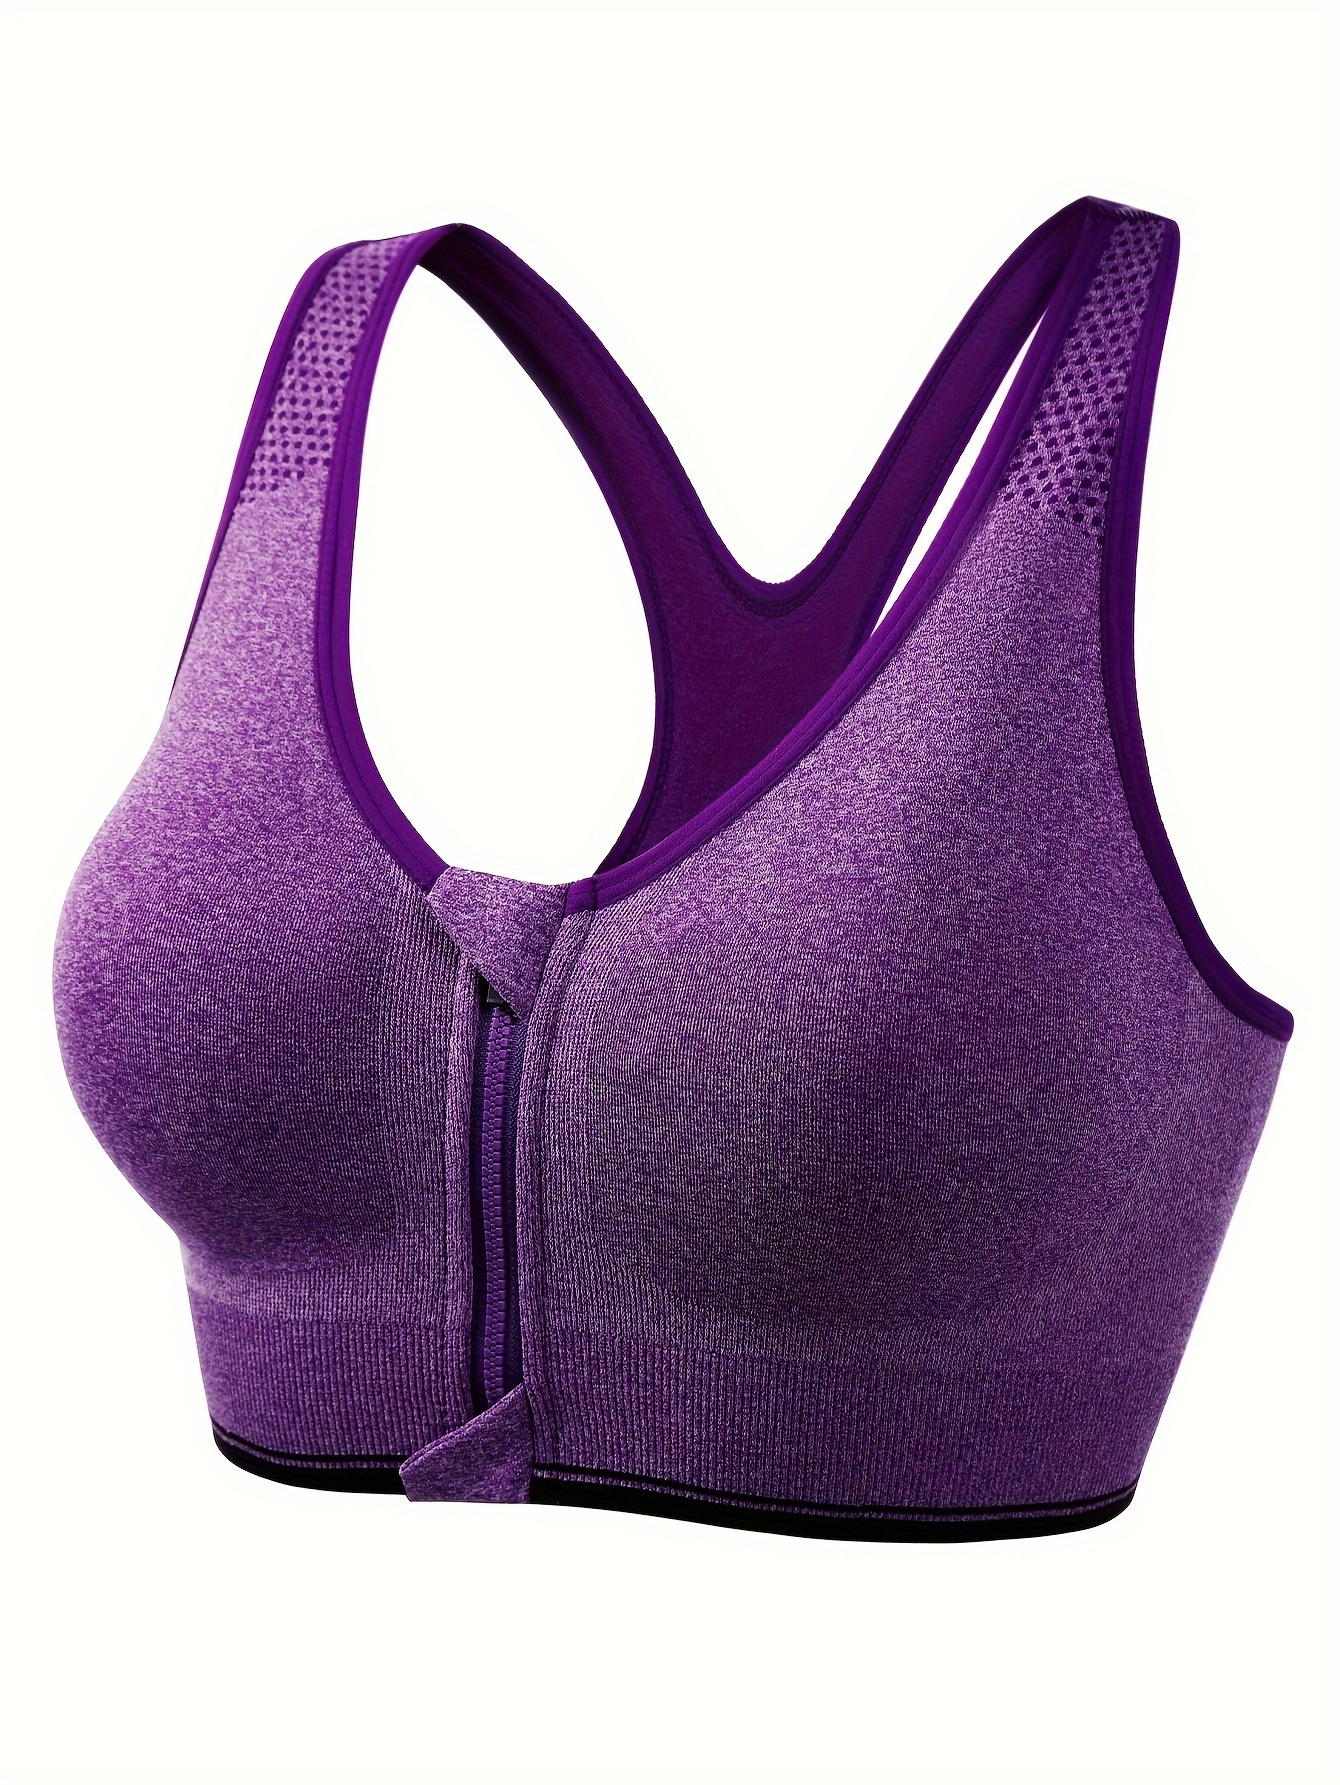 Workout Sports Bra with 3 Pack for Women, XXL Sized Padded